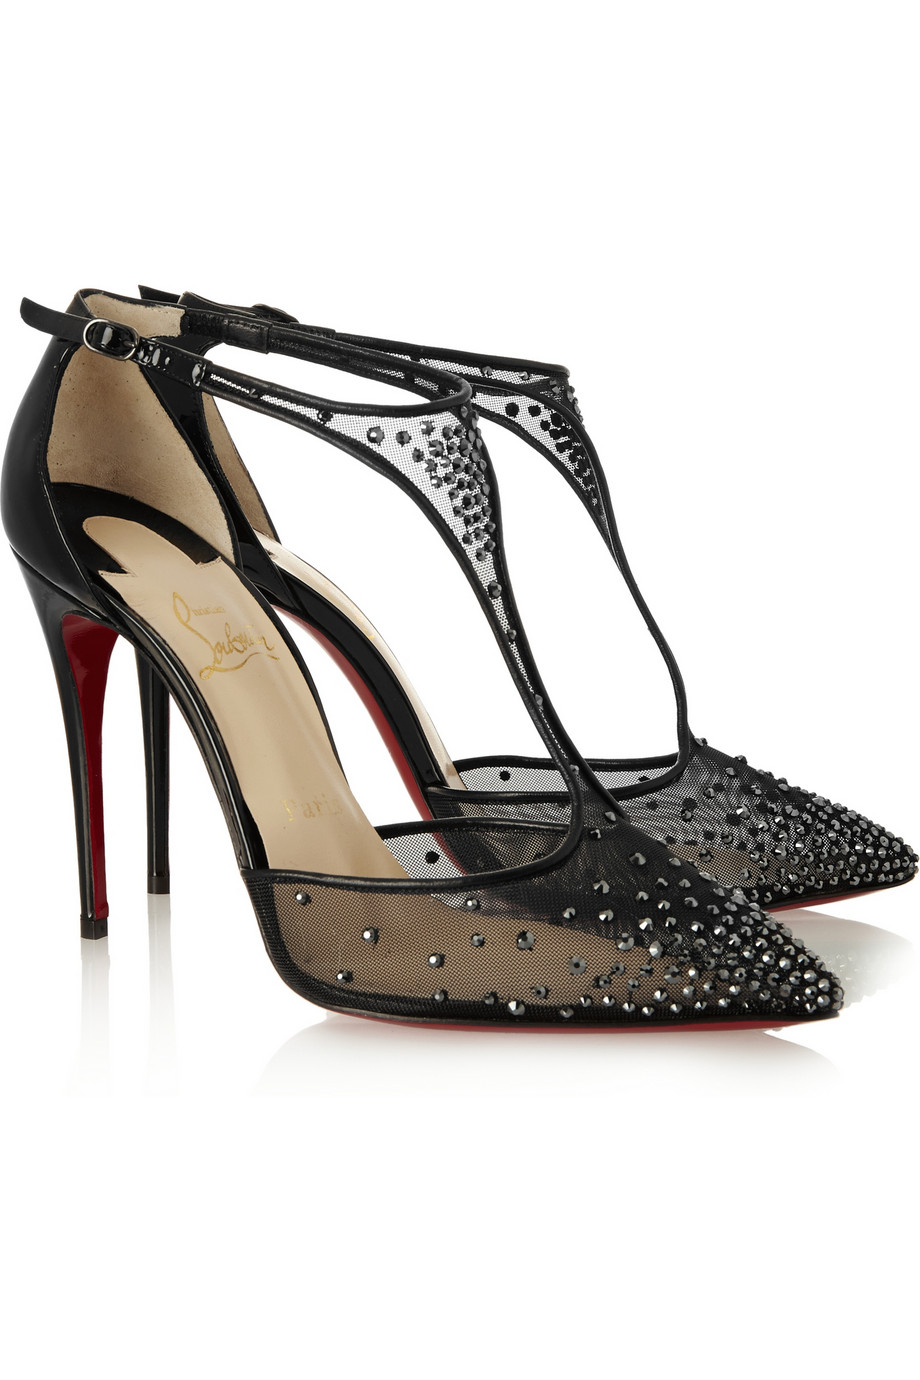 louboutin shoe prices - Christian louboutin Salopatina Embellished Patent Leather Pumps in ...